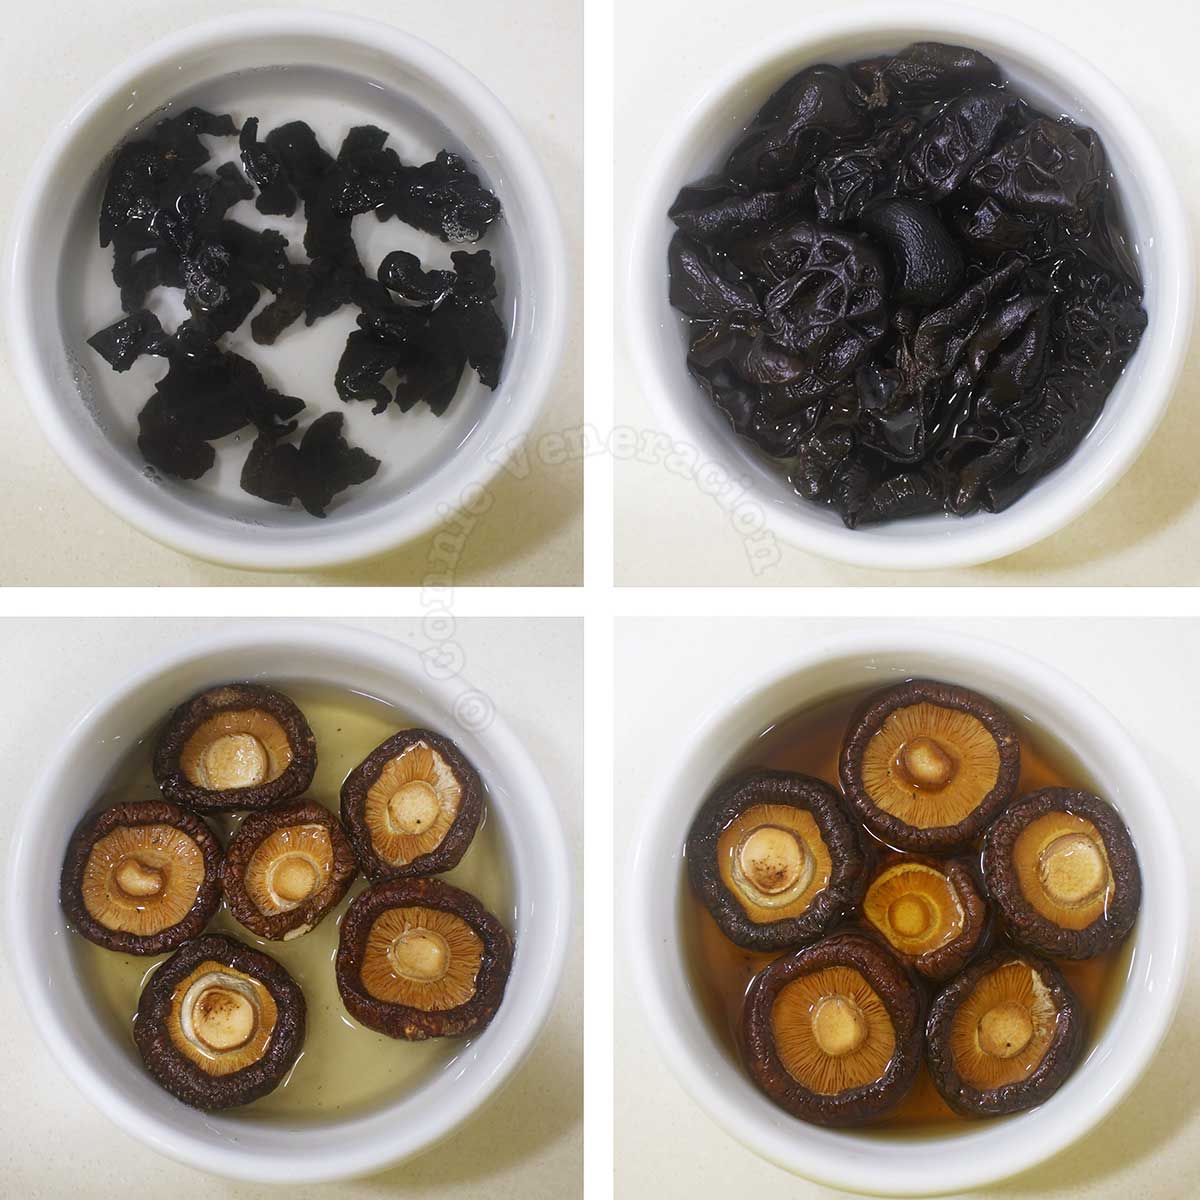 Dried black fungus and shiitake before and after rehydrating